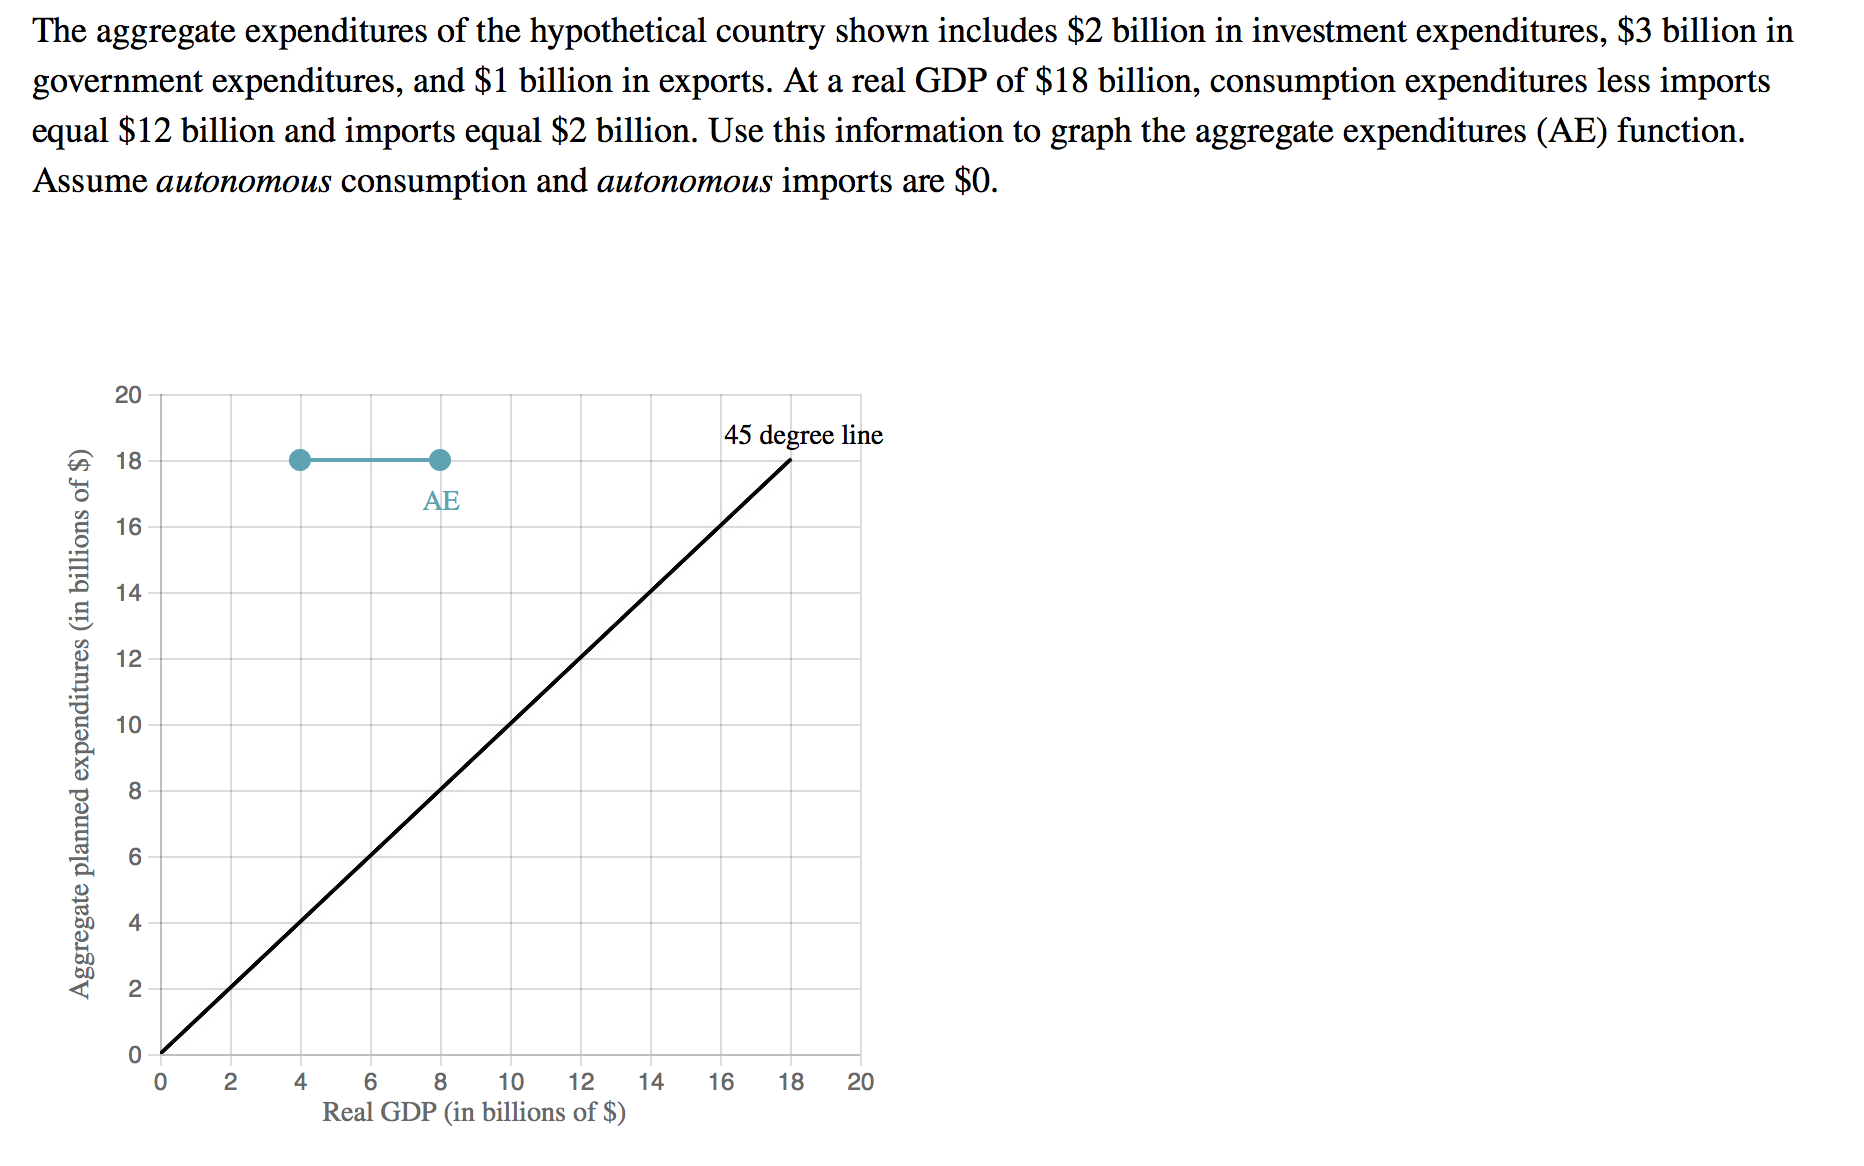 The aggregate expenditures of the hypothetical country shown includes $2 billion in investment expenditures, $3 billion in
government expenditures, and $1 billion in exports. At a real GDP of $18 billion, consumption expenditures less imports
equal $12 billion and imports equal $2 billion. Use this information to graph the aggregate expenditures (AE) function.
Assume autonomous consumption and autonomous imports are $0.
20
45 degree line
A 18
AE
16
14
12
10
8.
6.
2
4
10
12
14
16
18
20
Real GDP (in billions of $)
Aggregate planned expenditures (in billions of $)
